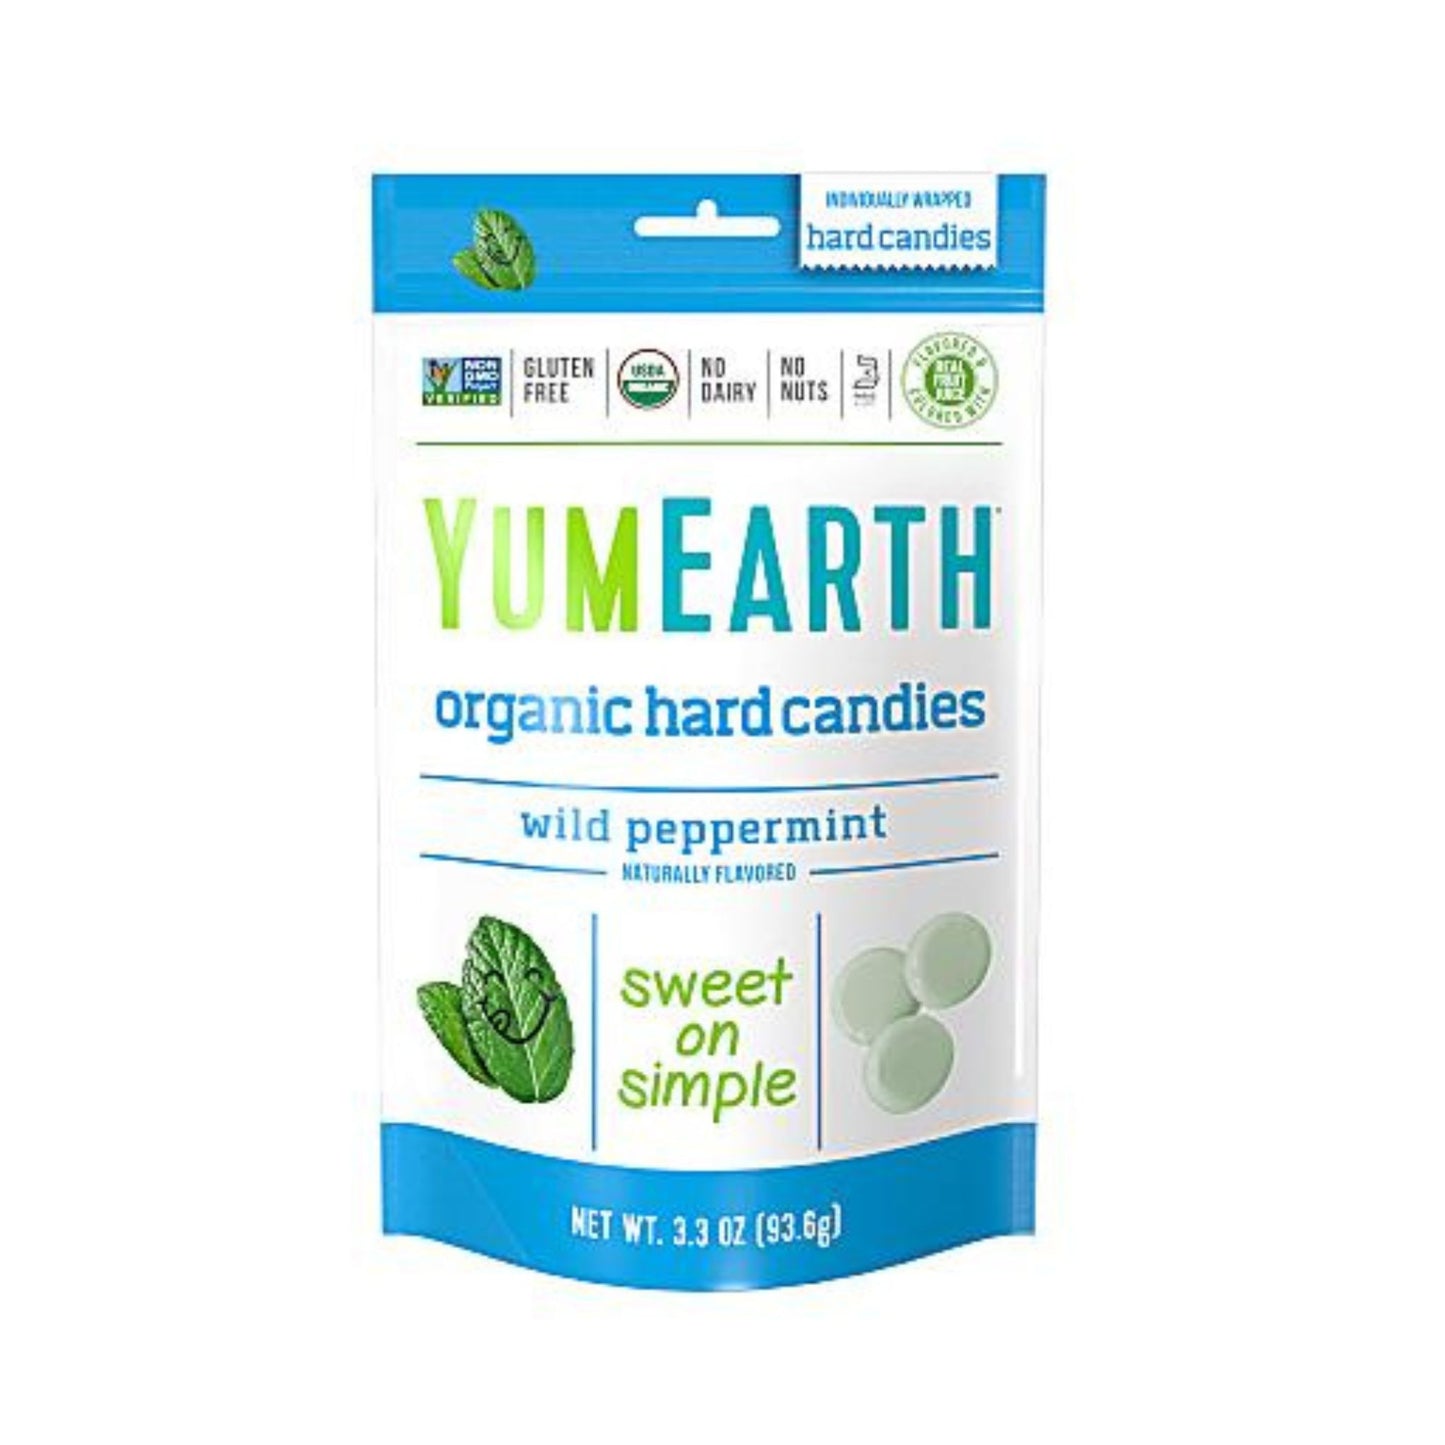 Yummy Earth Organic Wild Peppermint Hard Candies 3.3 Oz. Pack Of 3 Bags